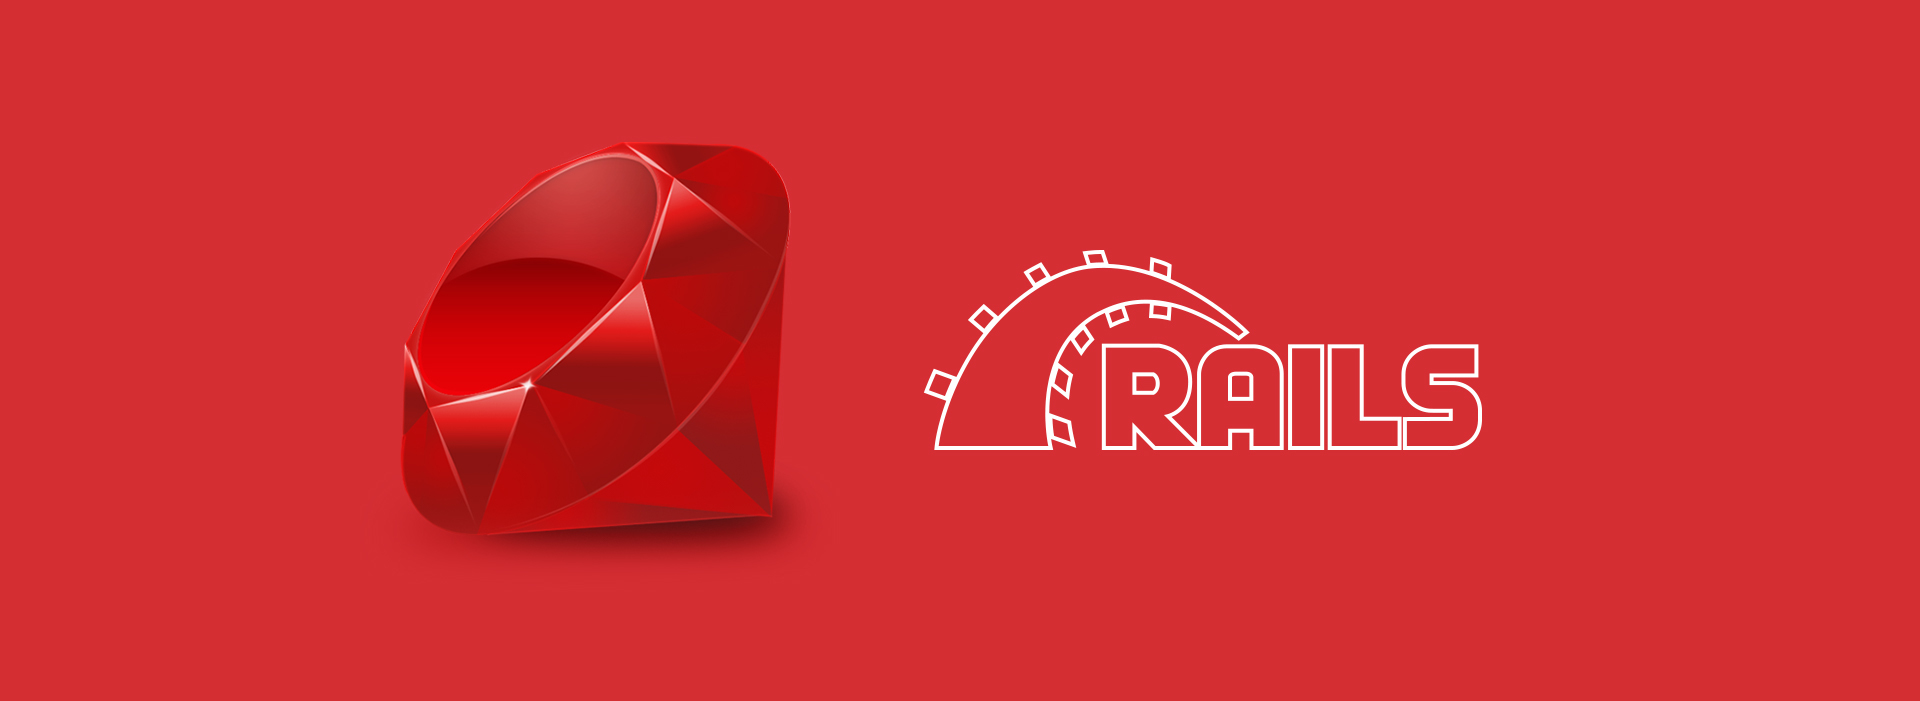 what is ruby on rails used for